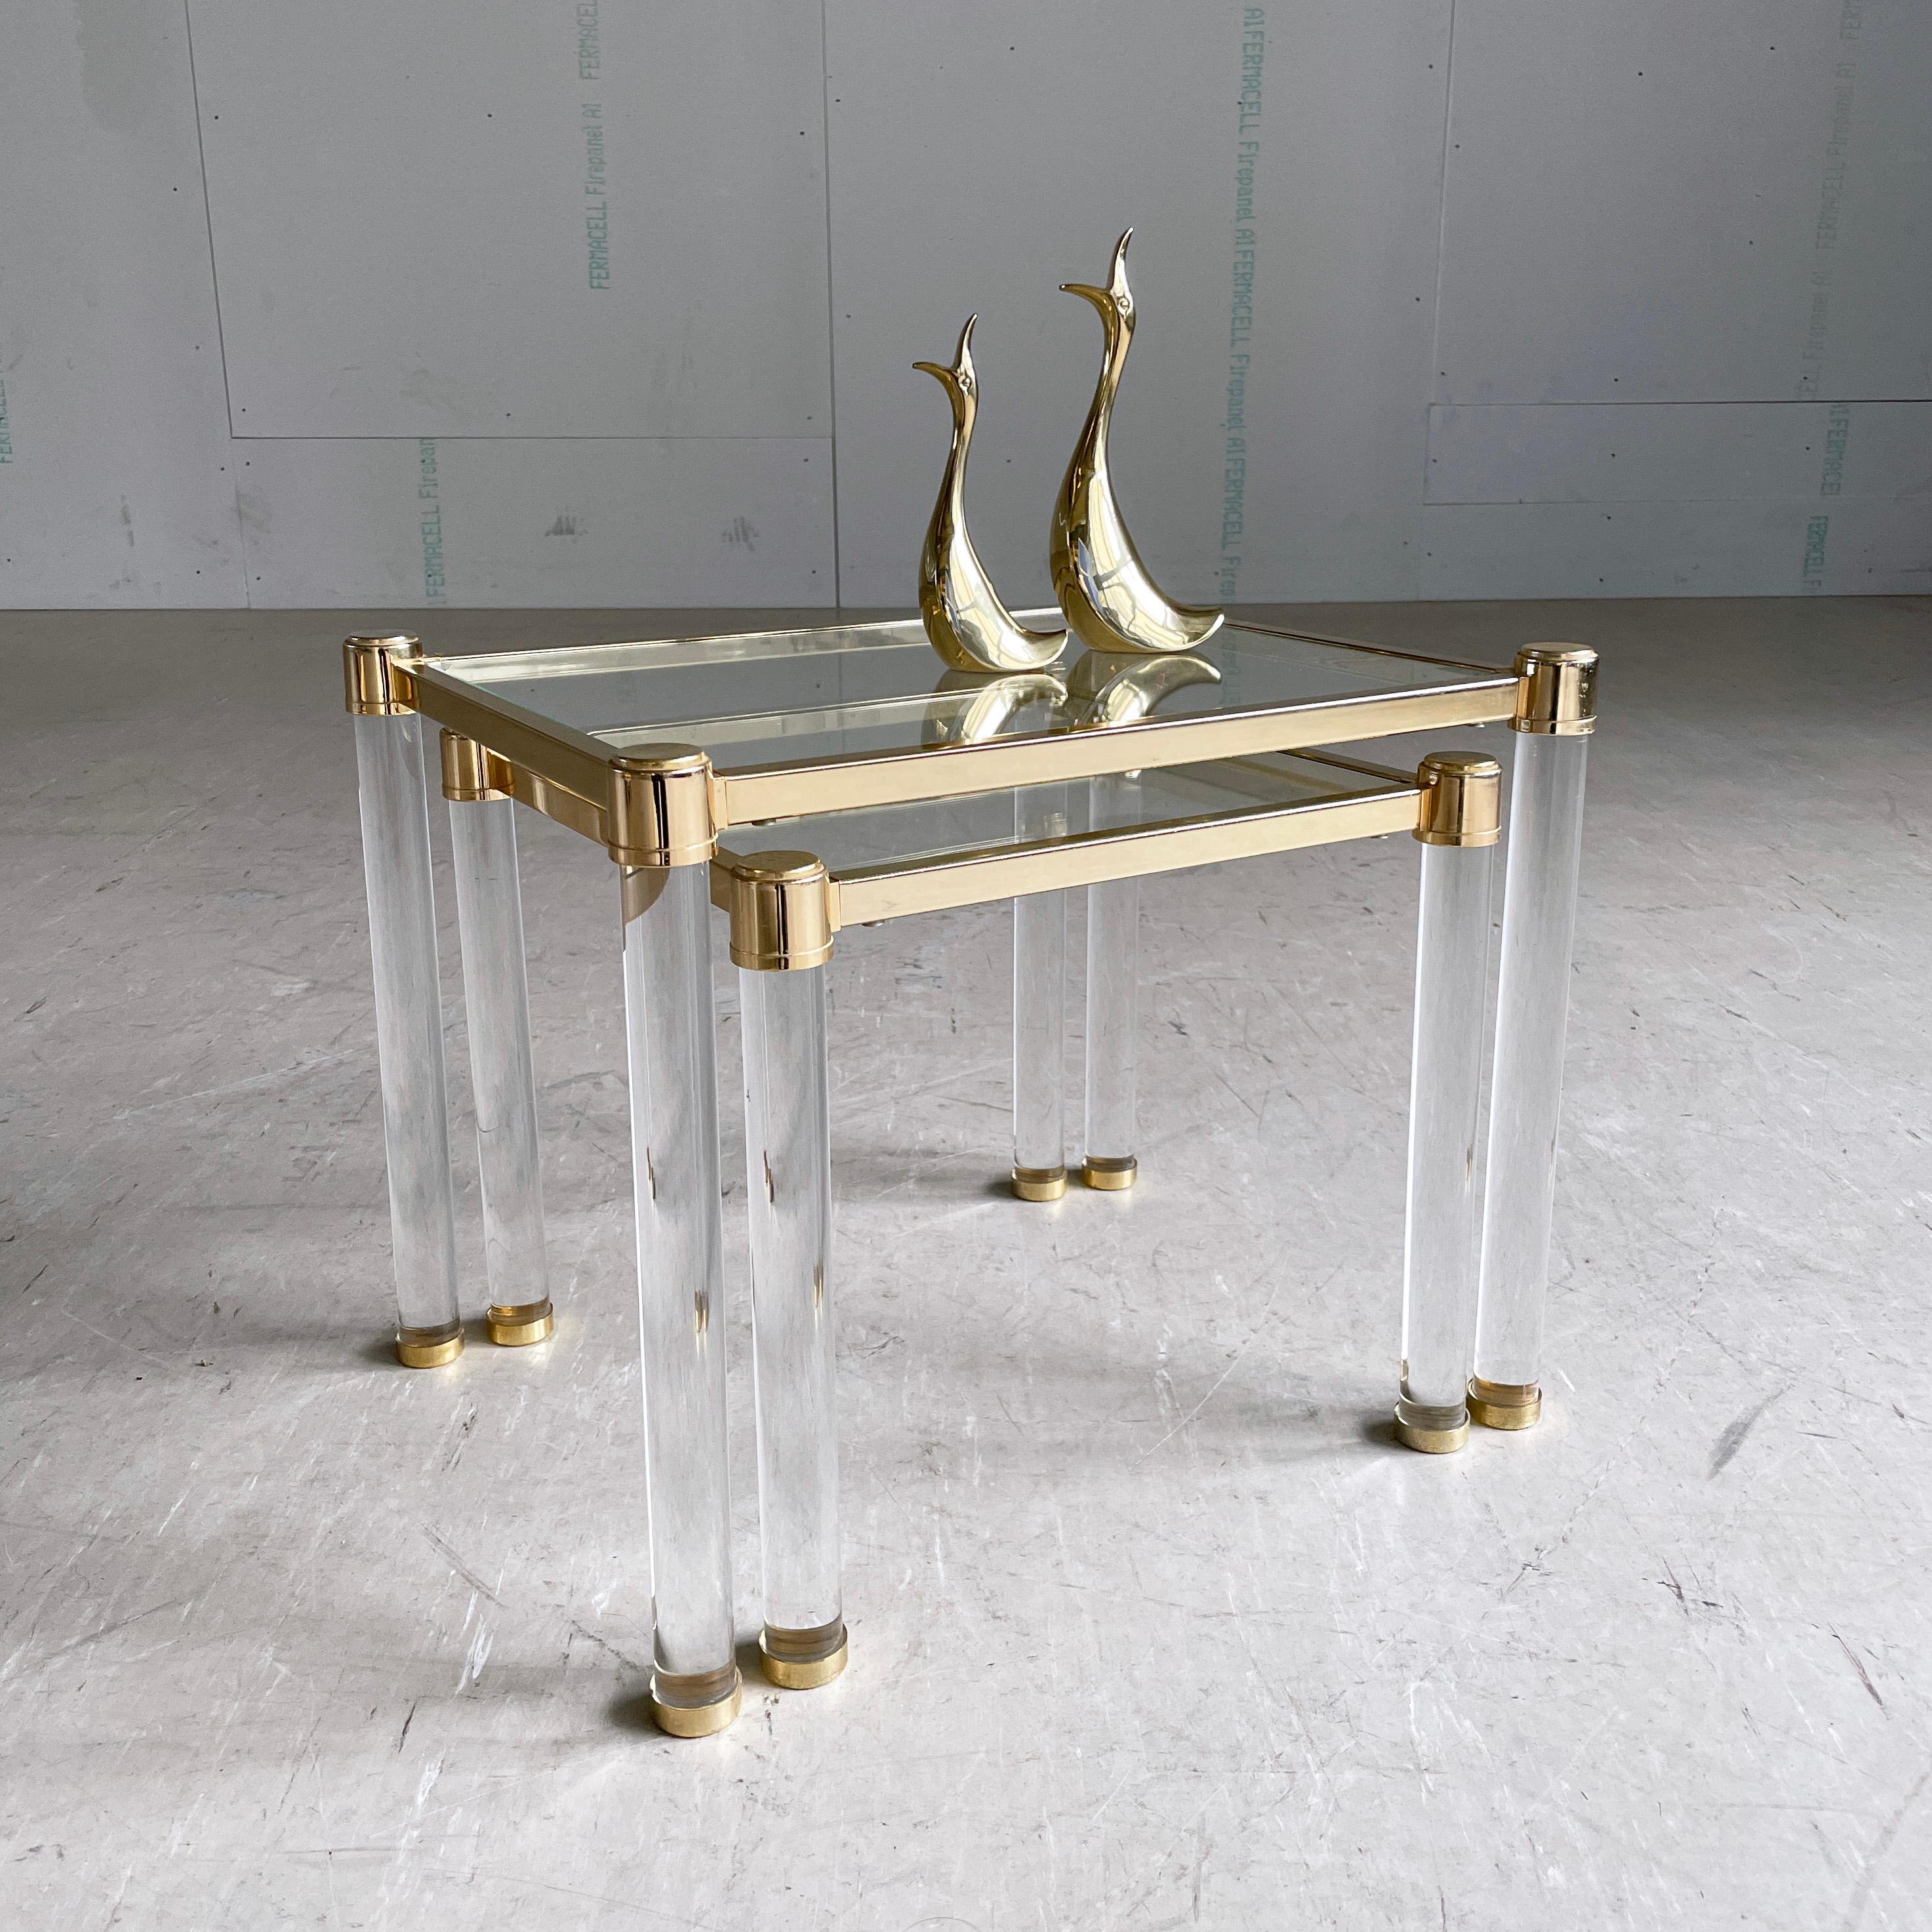 Pair of Hollywood Regency style nesting tables (set includes 2 tables). Clear glass tabletop with gold metal frame and leg bases. Transparent acrylic Legs.  
Measurements: 
Small Table - Height 36cm Width 40cm Depth 40cm
Large Table - Height 41cm